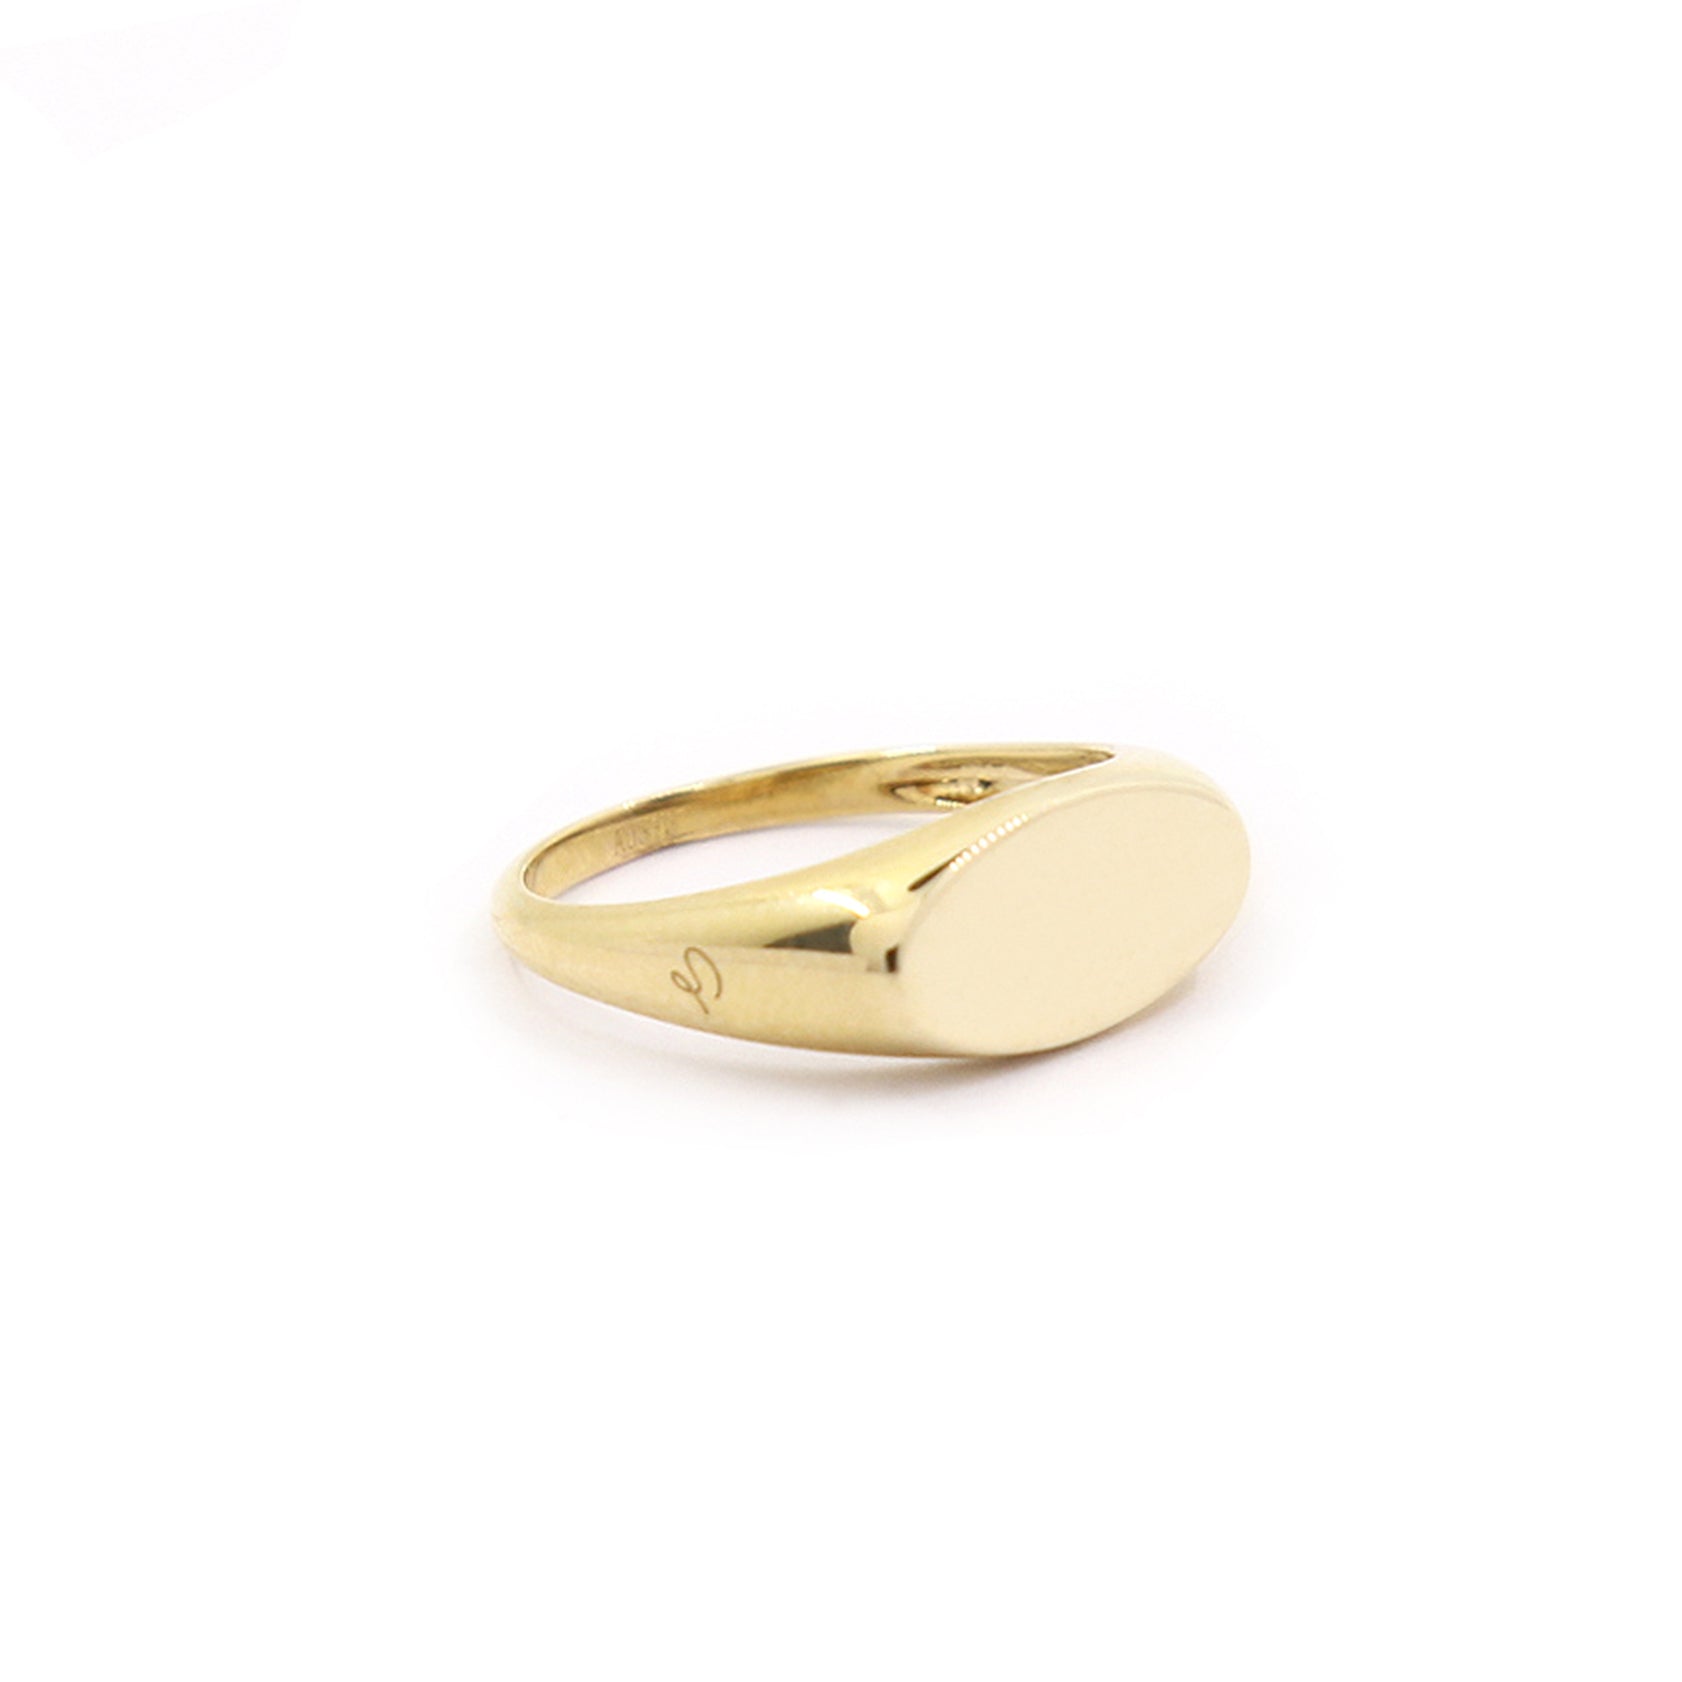 9k GOLD PACHA OVAL SIGNET RING